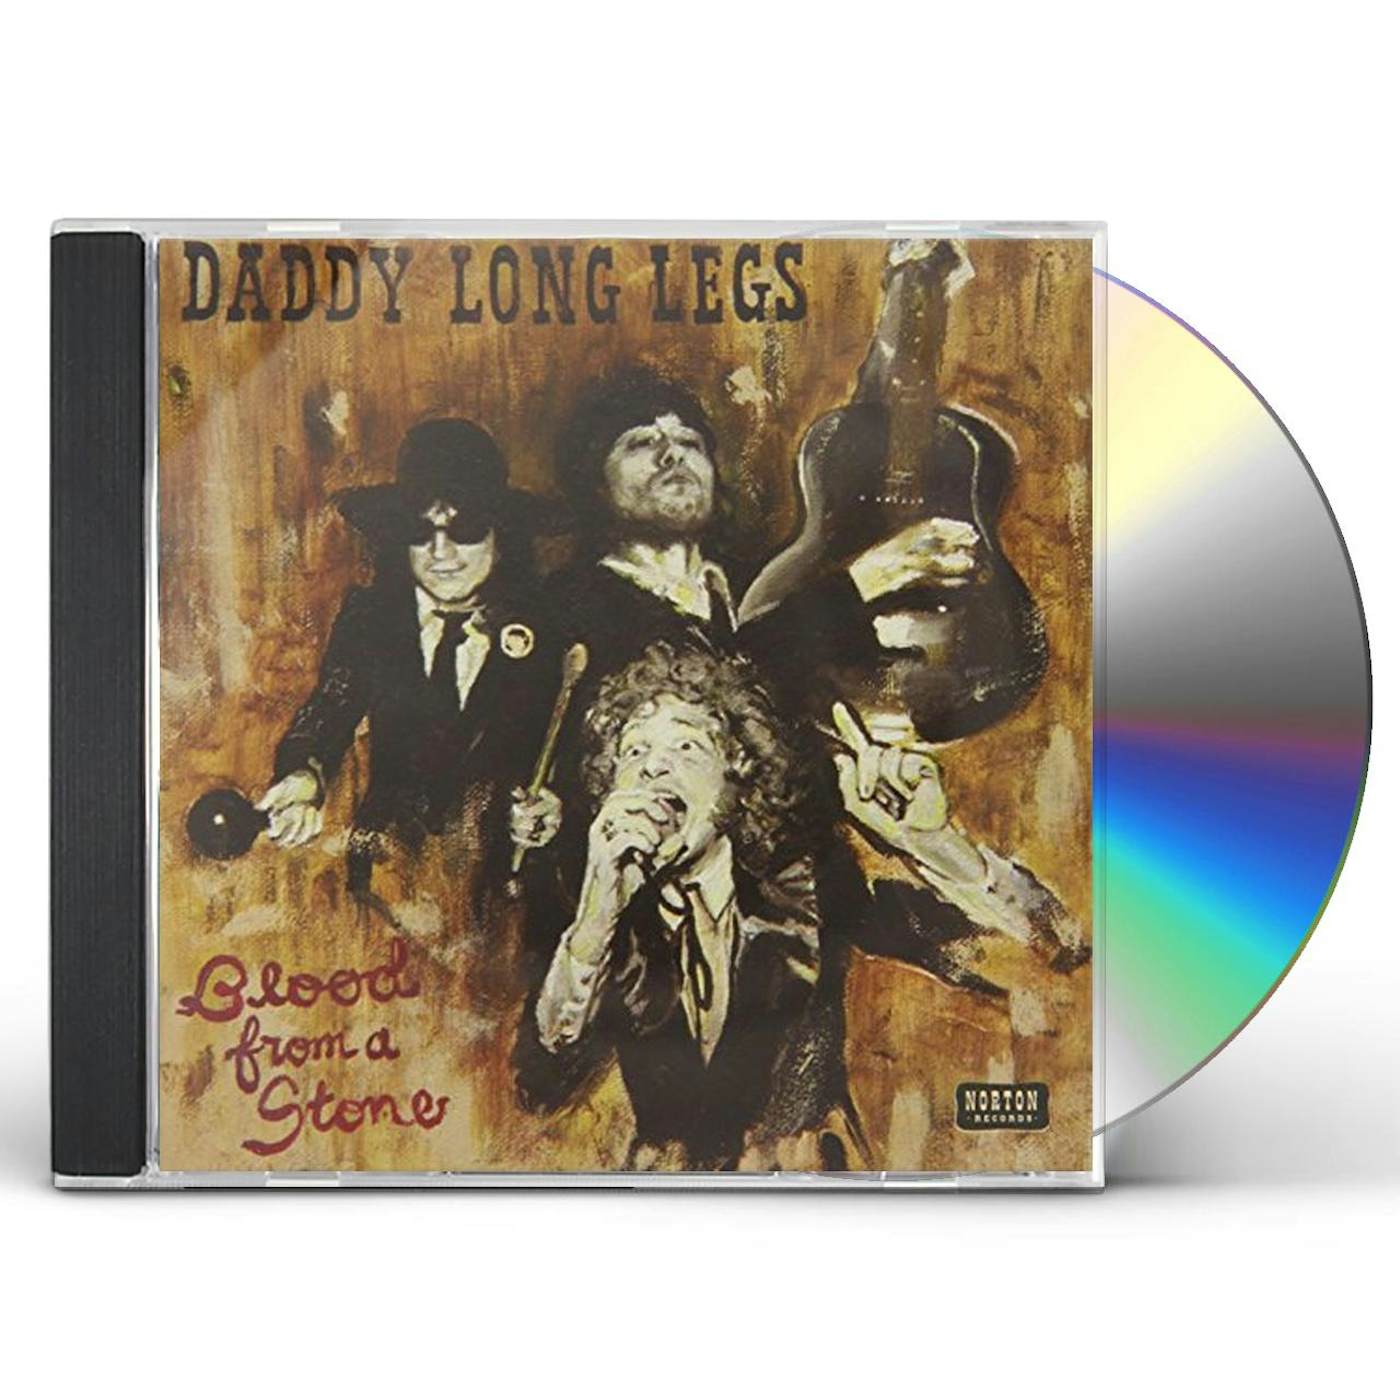 DADDY LONG LEGS BLOOD FROM A STONE CD